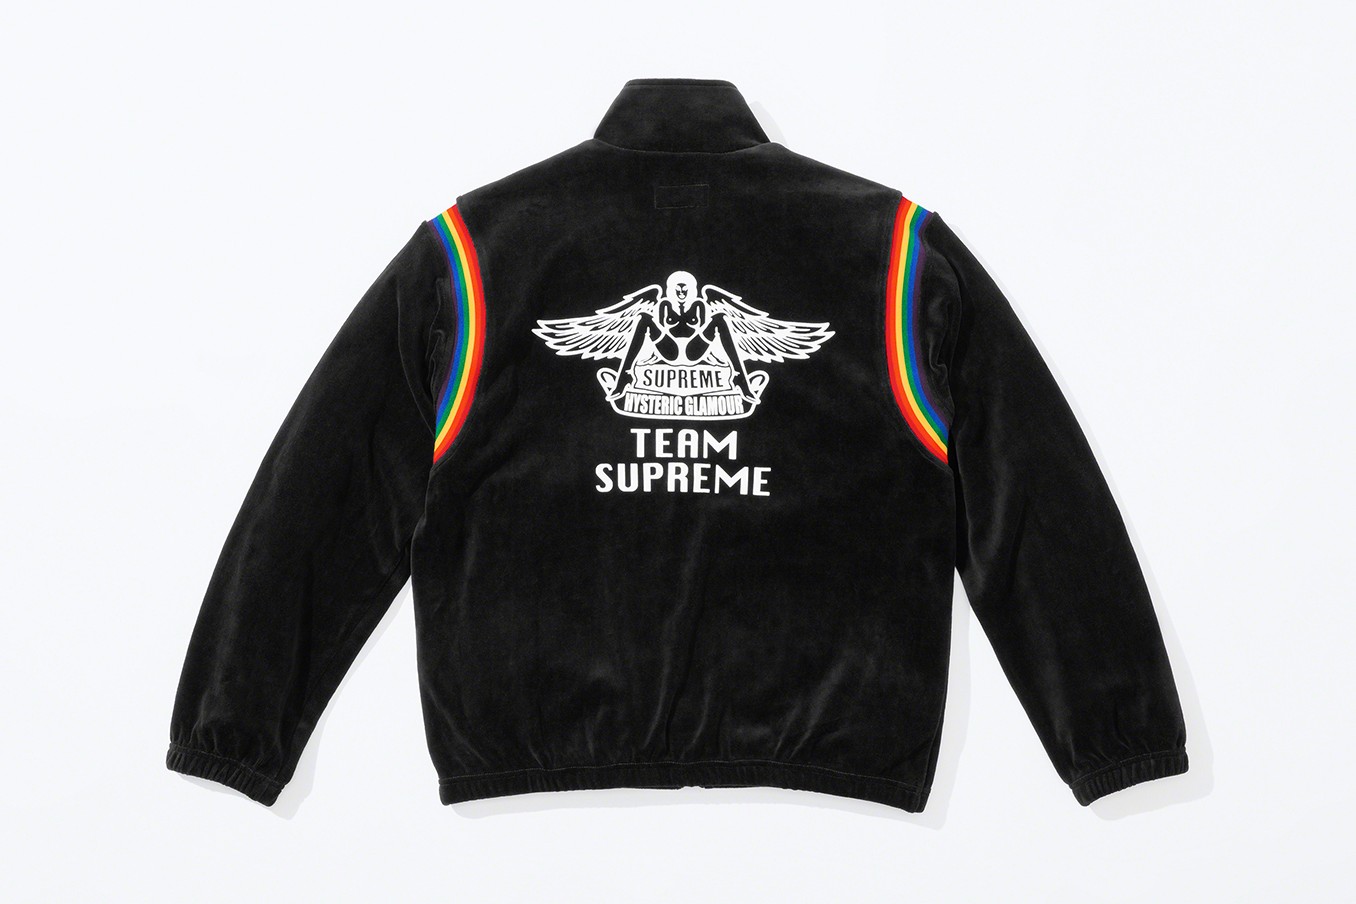 Supreme x Hysteric Glamour Is Not for the Easily Offended